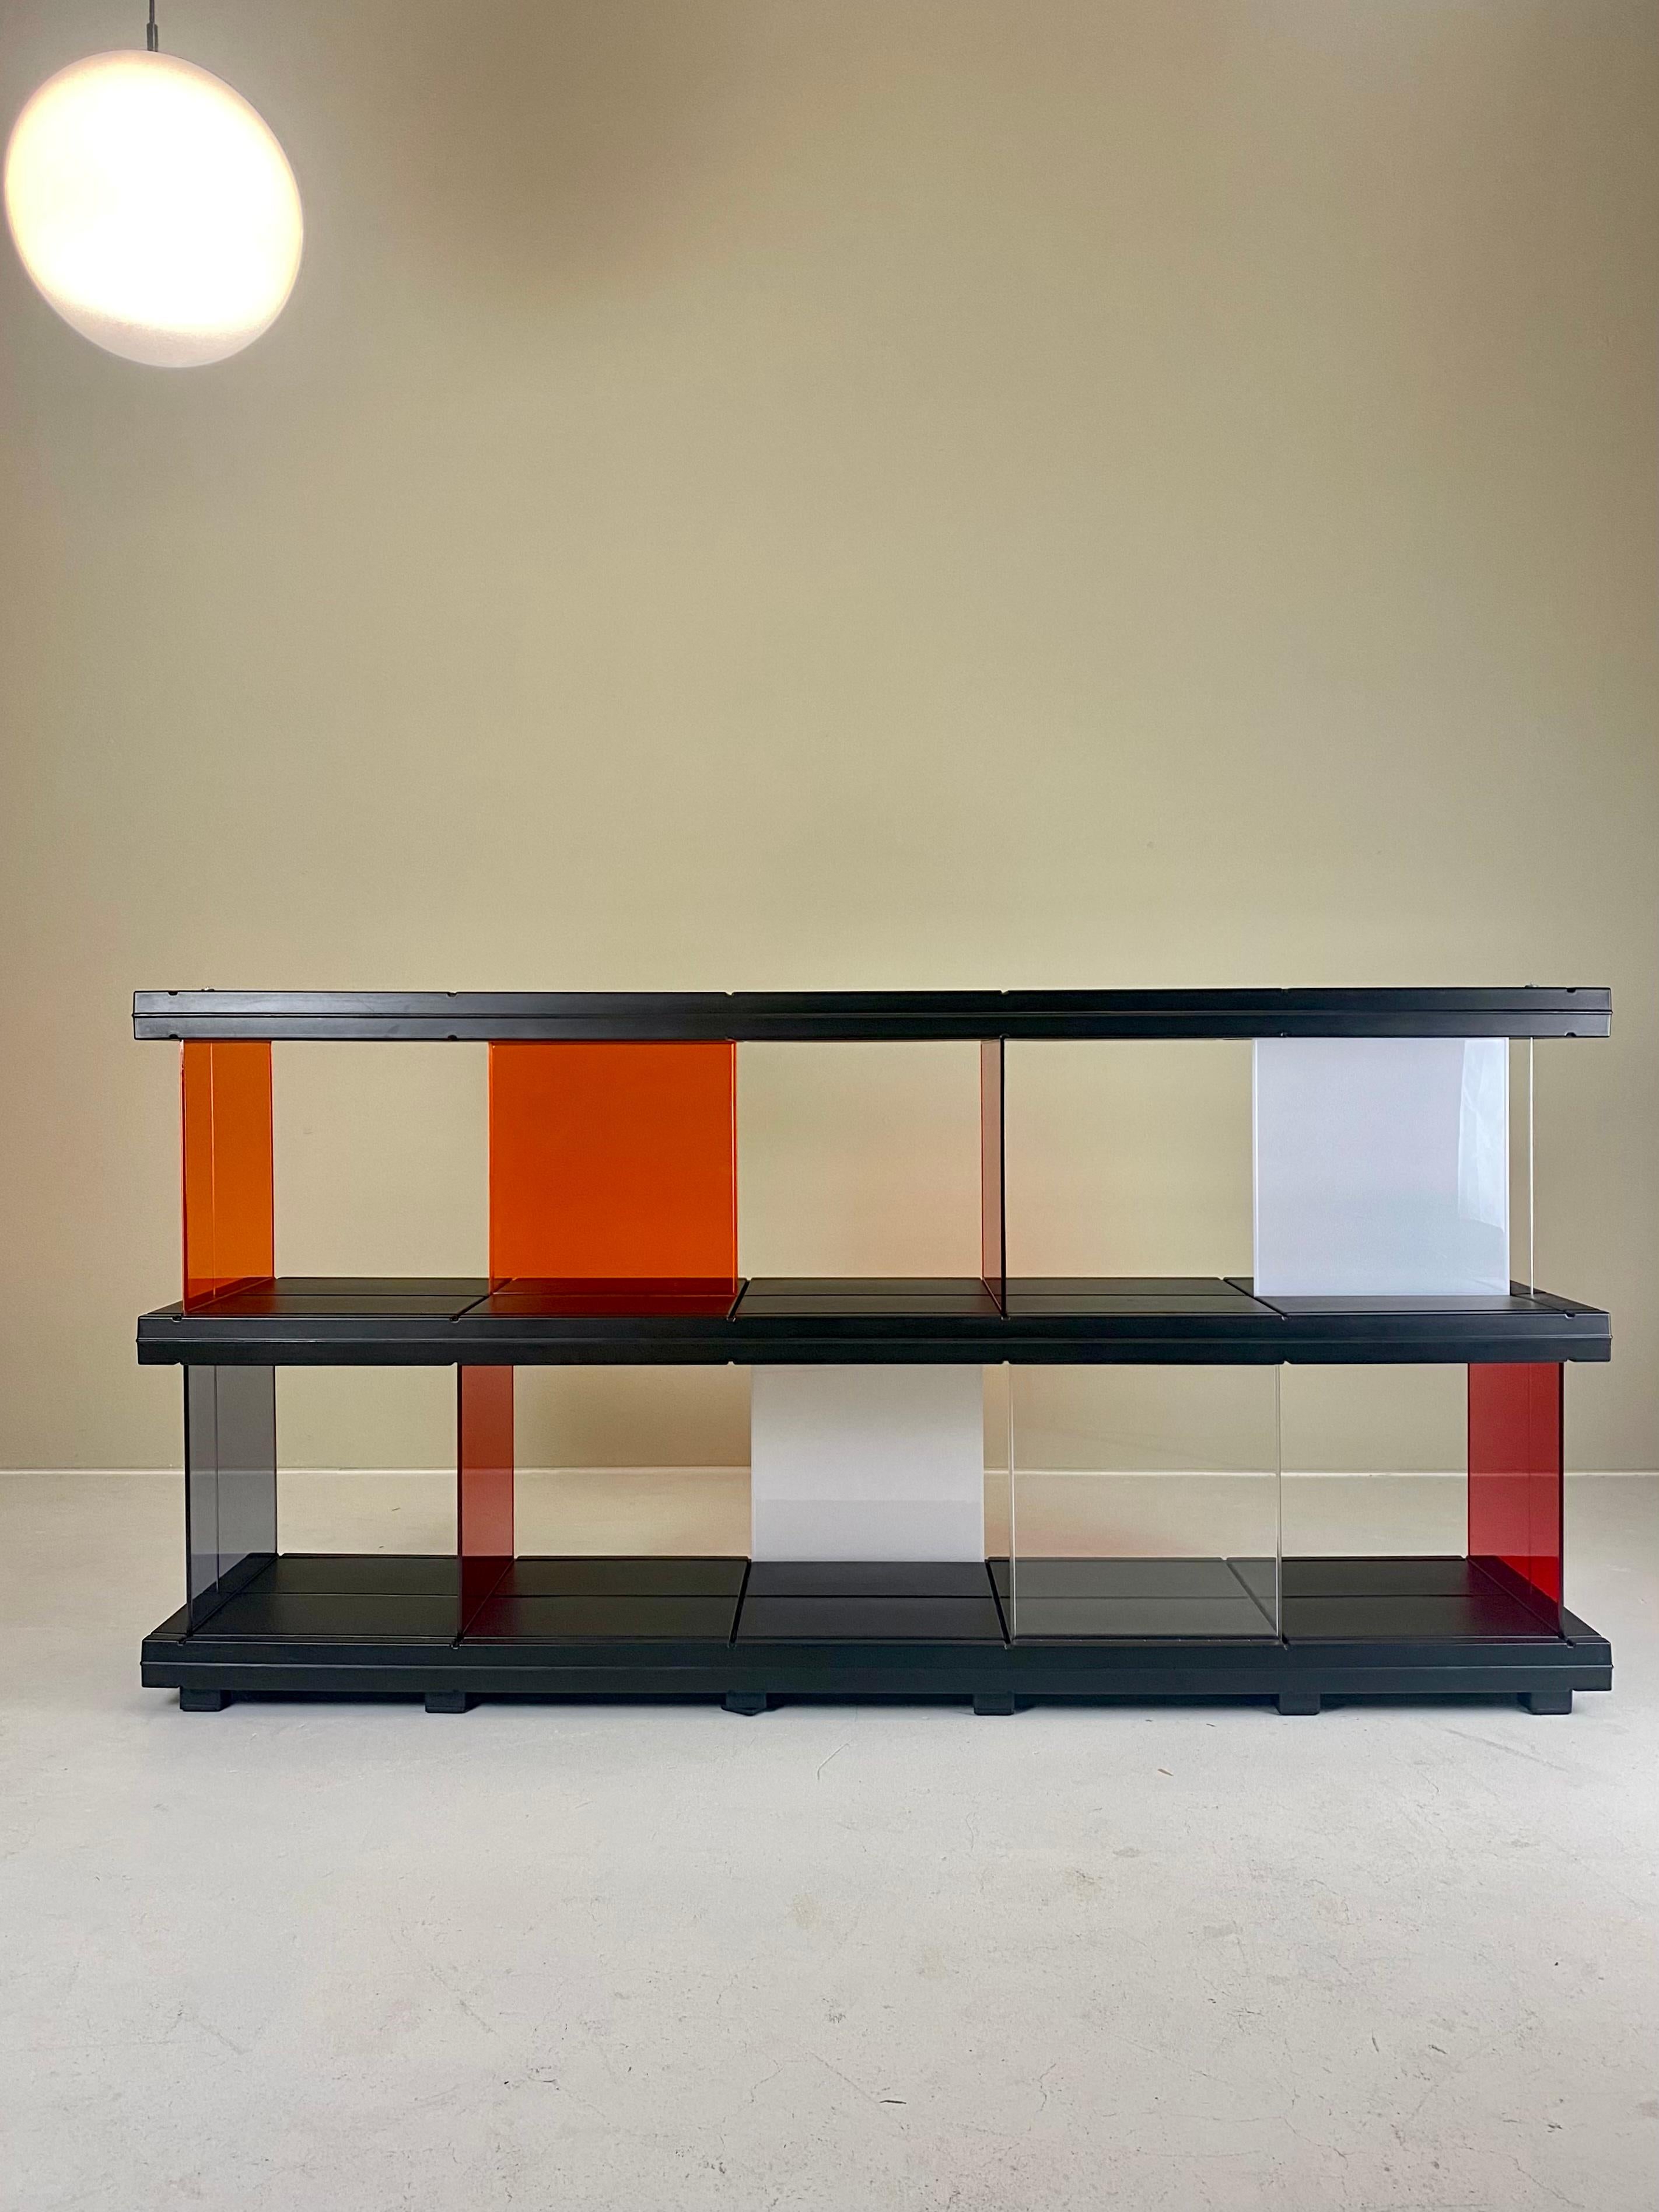 Designed in 2000 and no longer in production today, this rare sideboard is Ronan & Erwan Bouroullec’s modern take on the classic masterpieces as designed by Charlotte Perriand and Jean Prouve. 

Made of blown polypropylene and polycarbonate, there